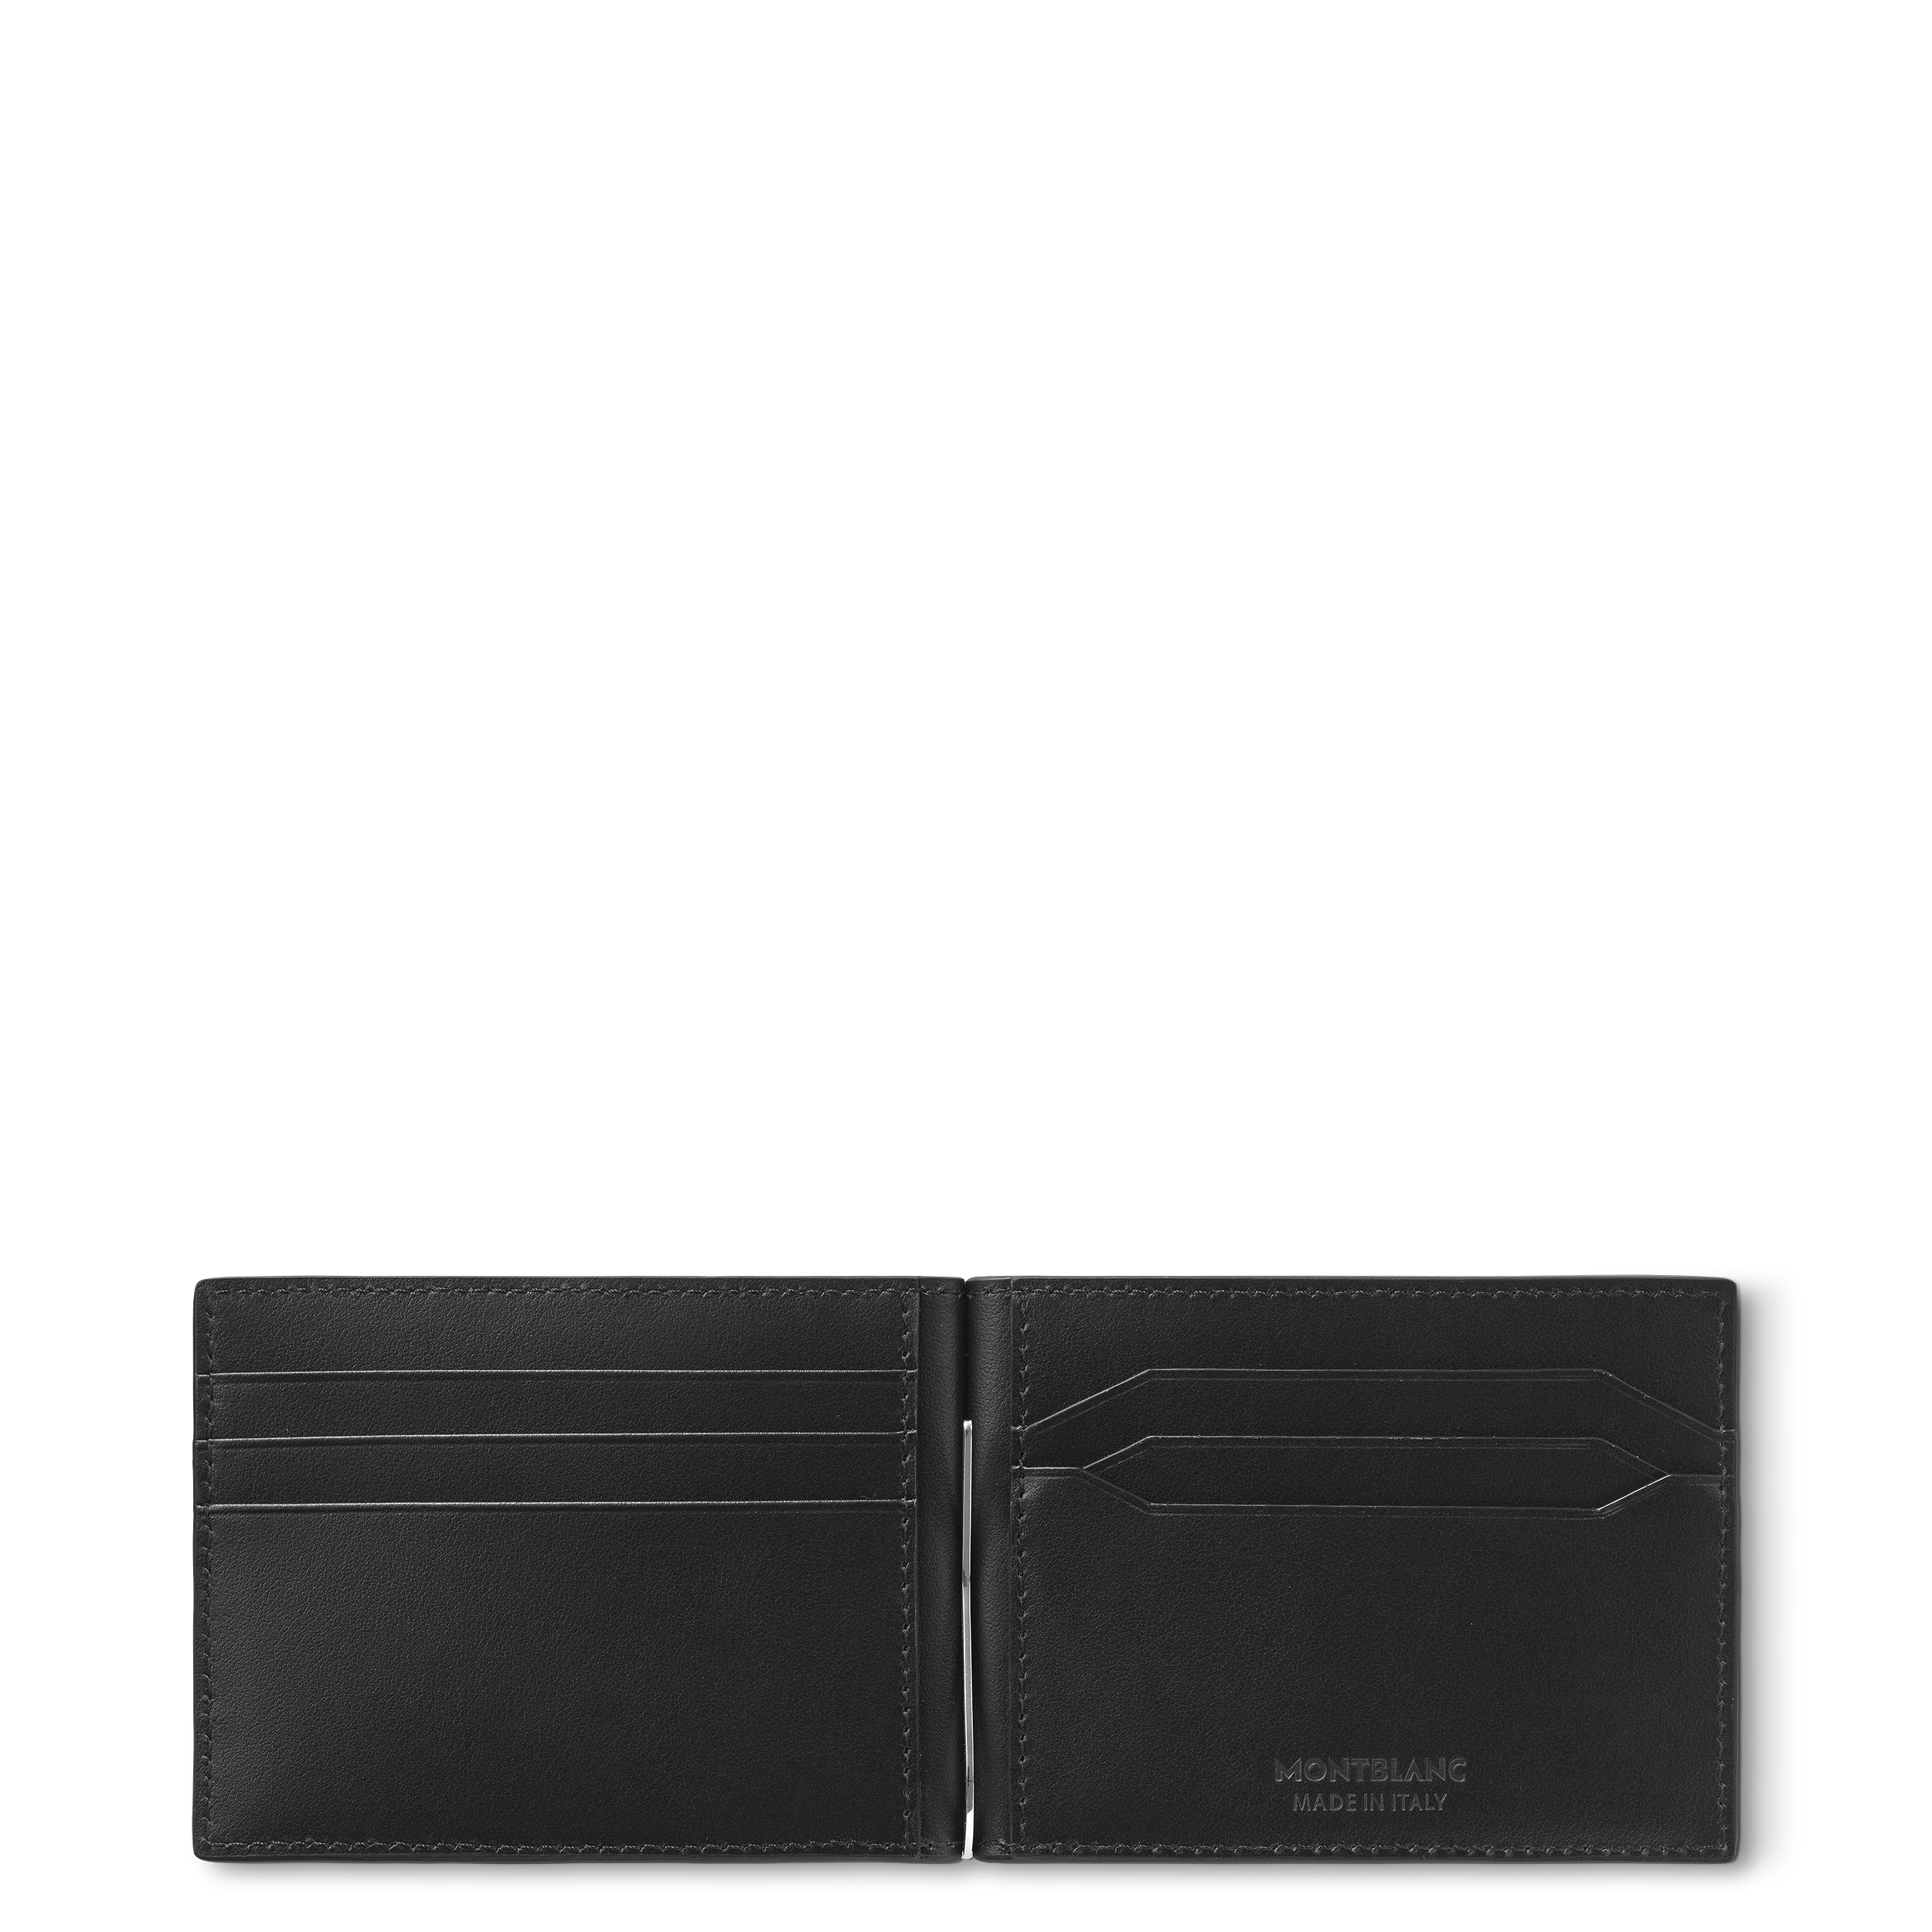 Montblanc Extreme 3.0 wallet 6cc with money clip, image 5